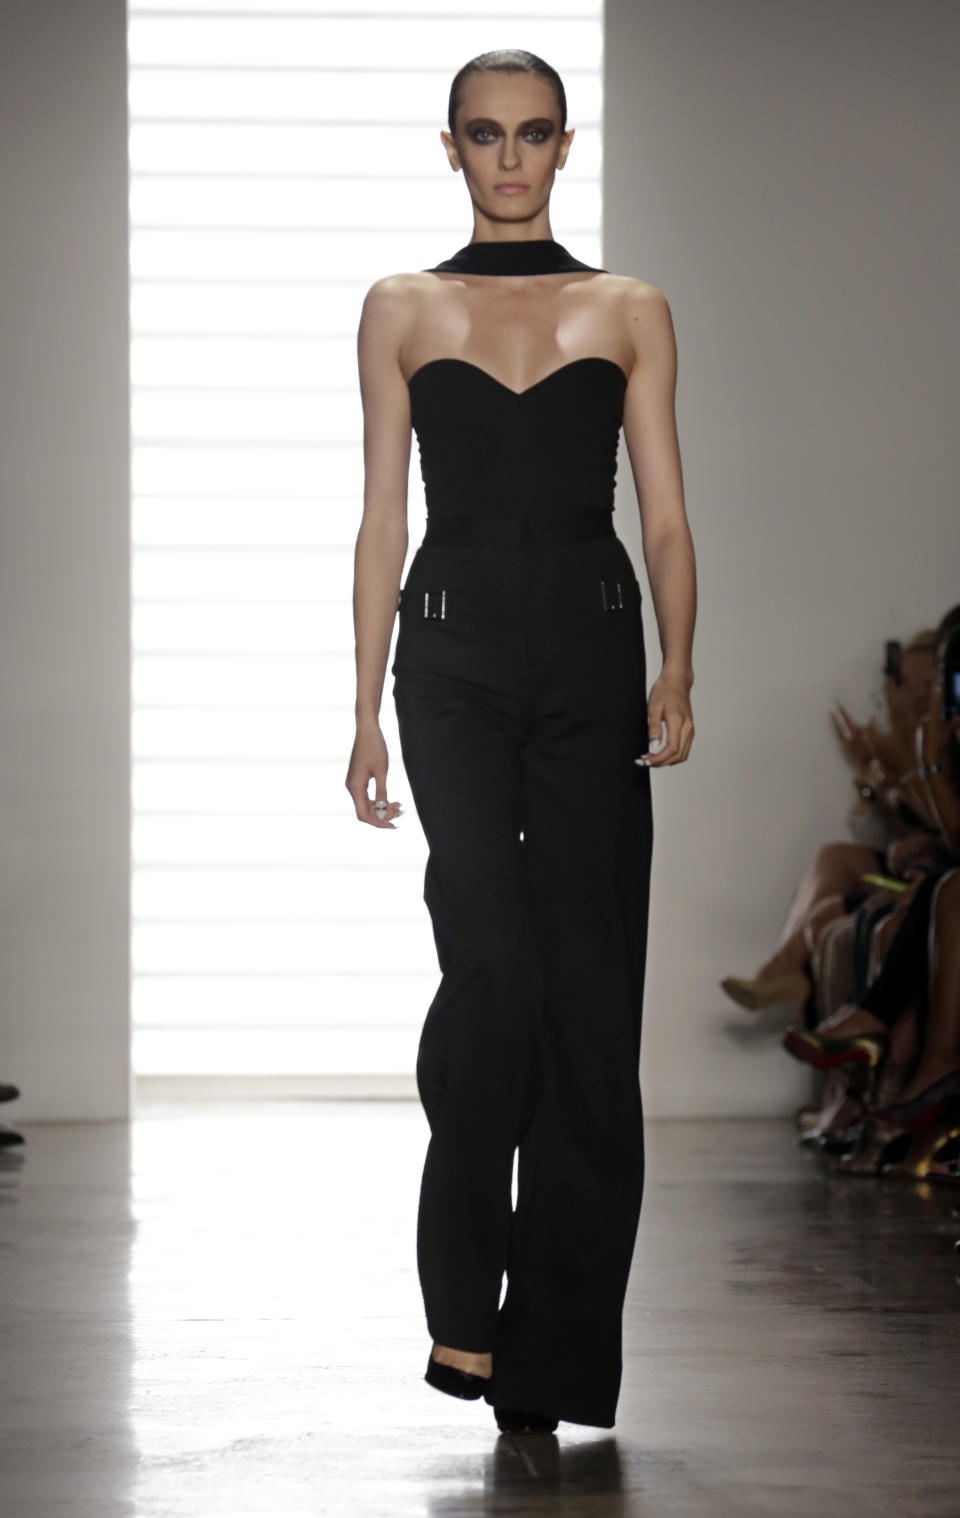 The Cushnie et Ochs Spring 2014 collection is modeled during Fashion Week in New York, Friday, Sept. 6, 2013. (AP Photo/Richard Drew)